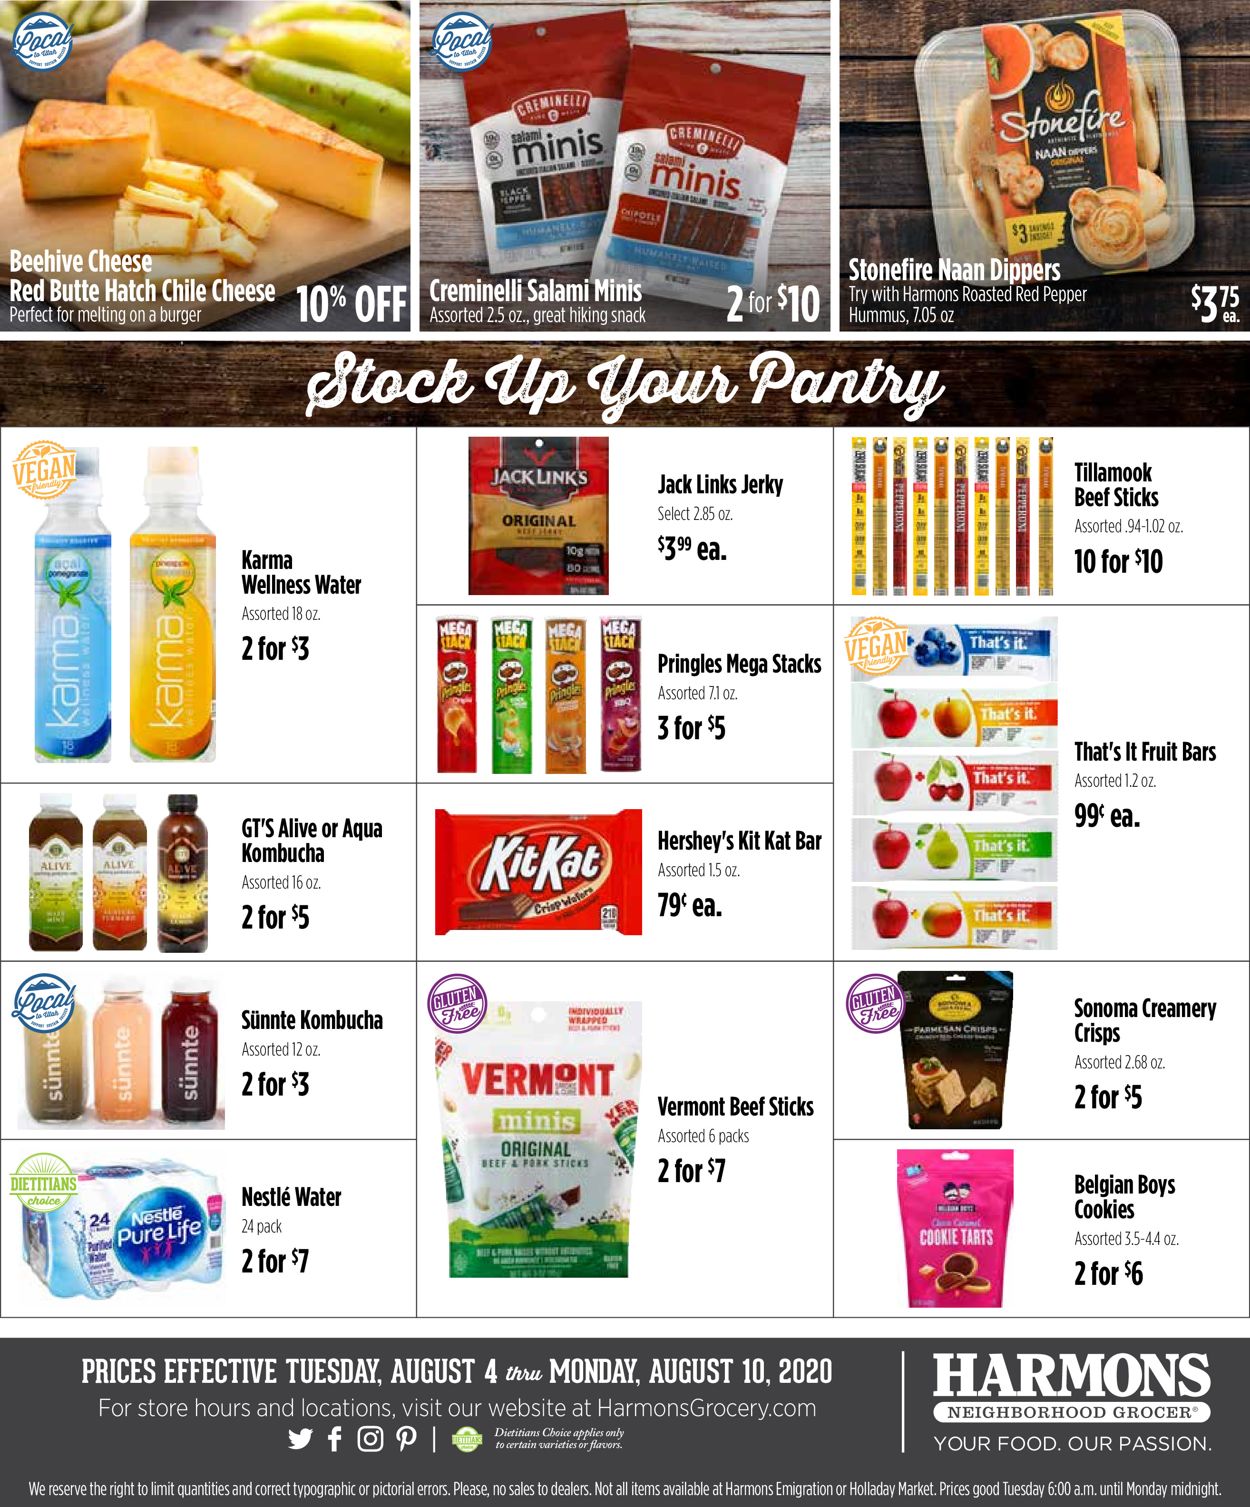 Harmons Current weekly ad 08/04 08/10/2020 [8]